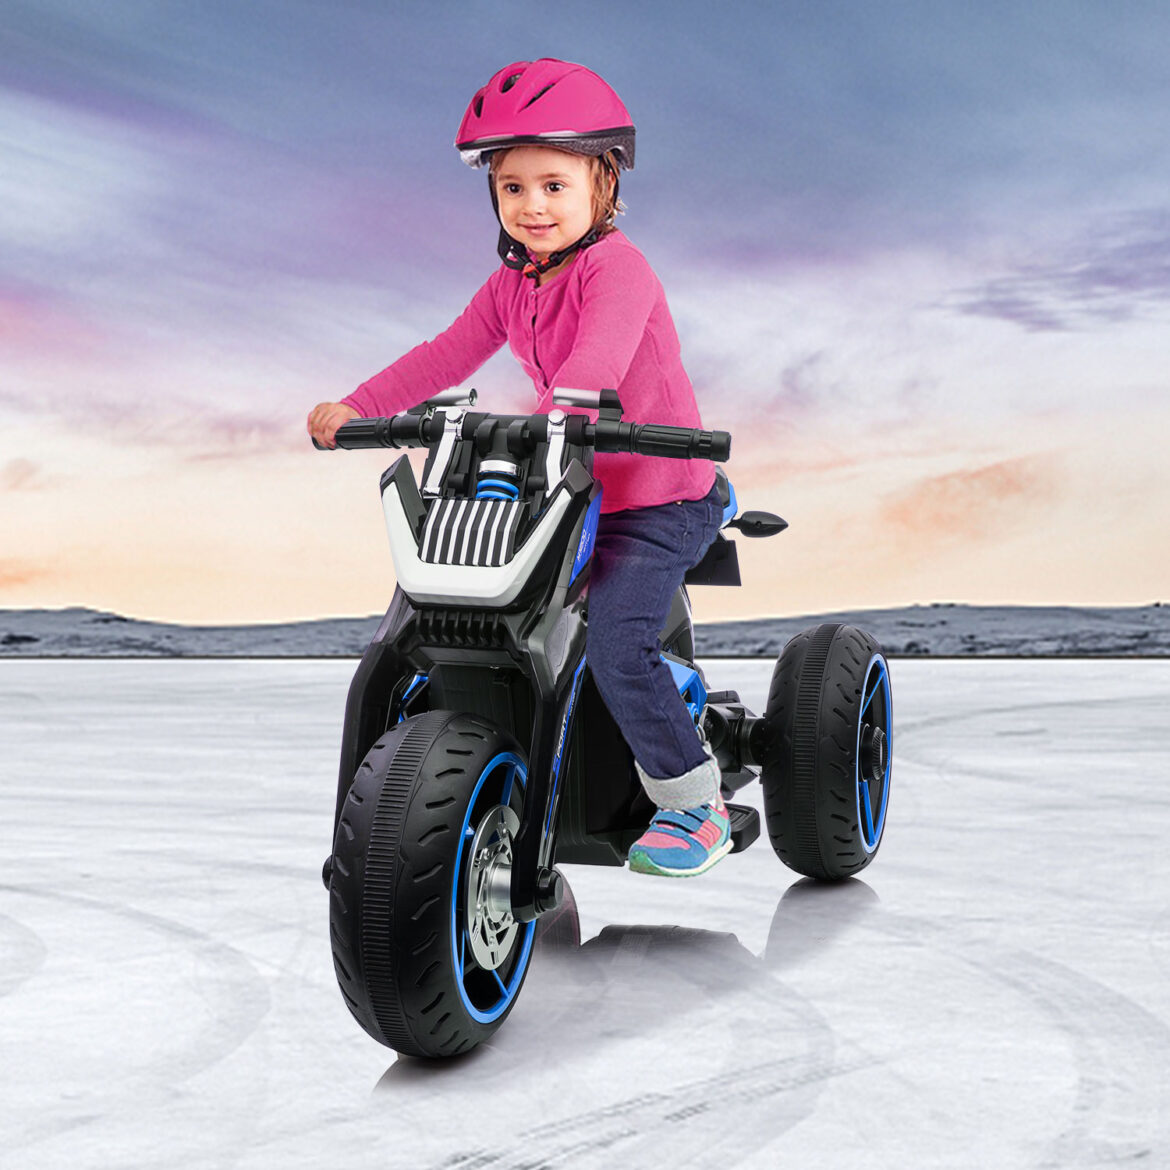 Kids Motorcycle Manufacturers & Suppliers, China